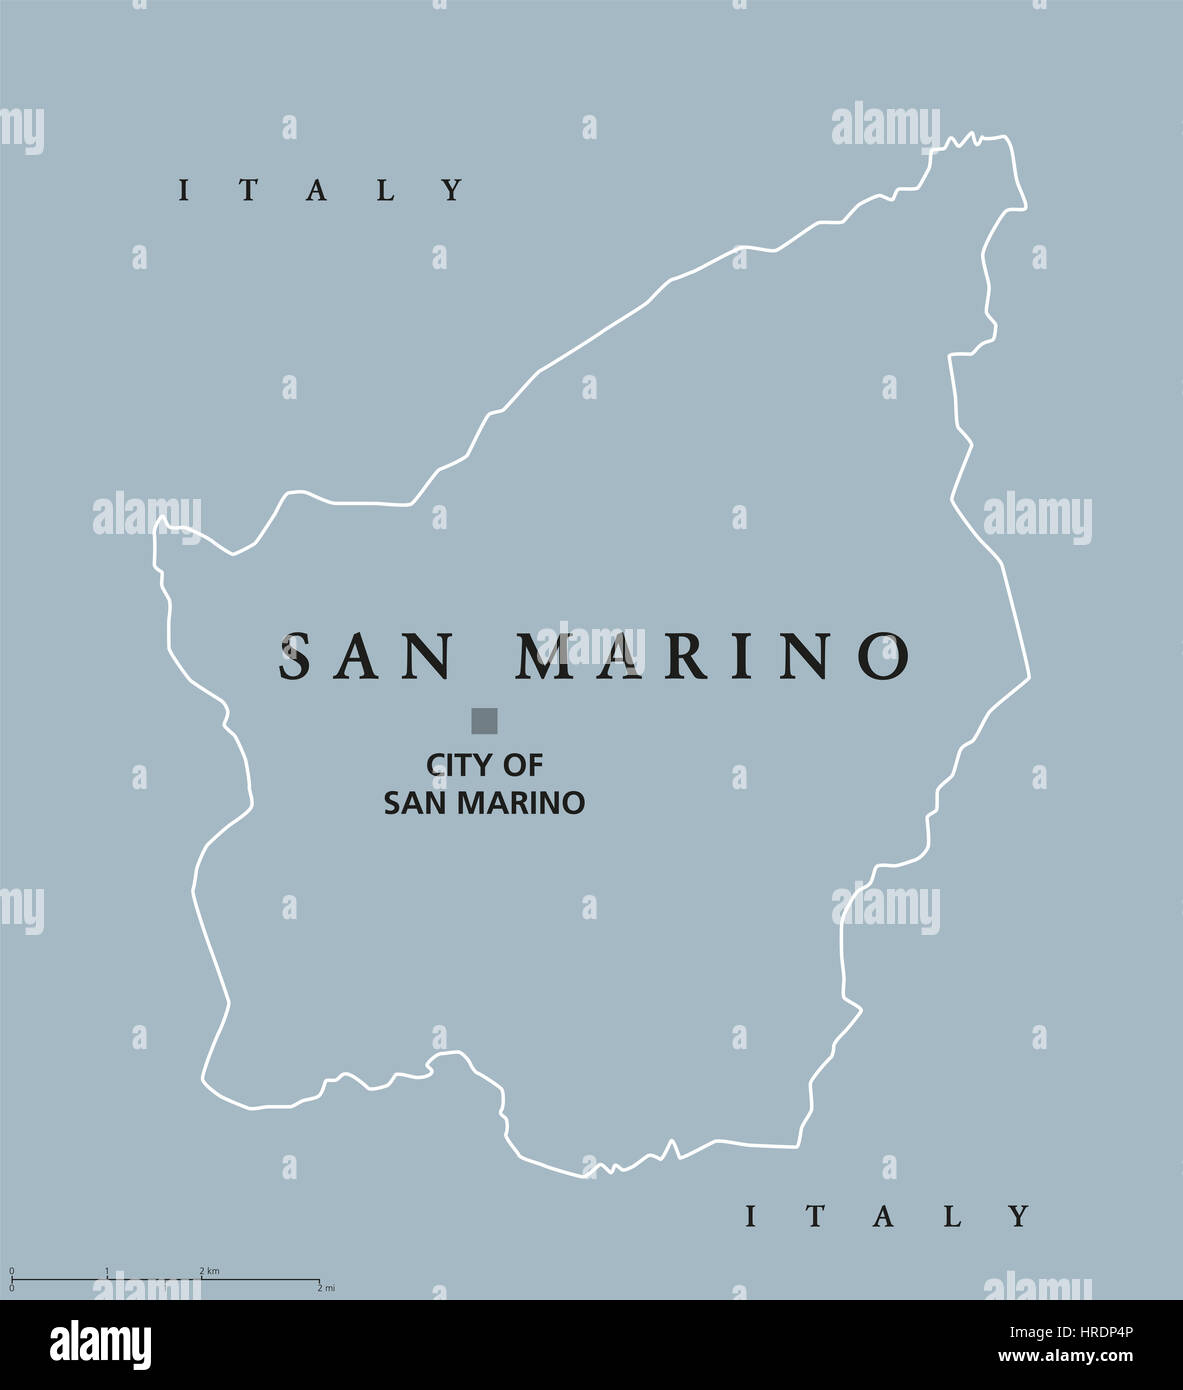 Most Serene Republic of San Marino political map with capital City of San Marino. Enclaved microstate surrounded by Italy. Stock Photo